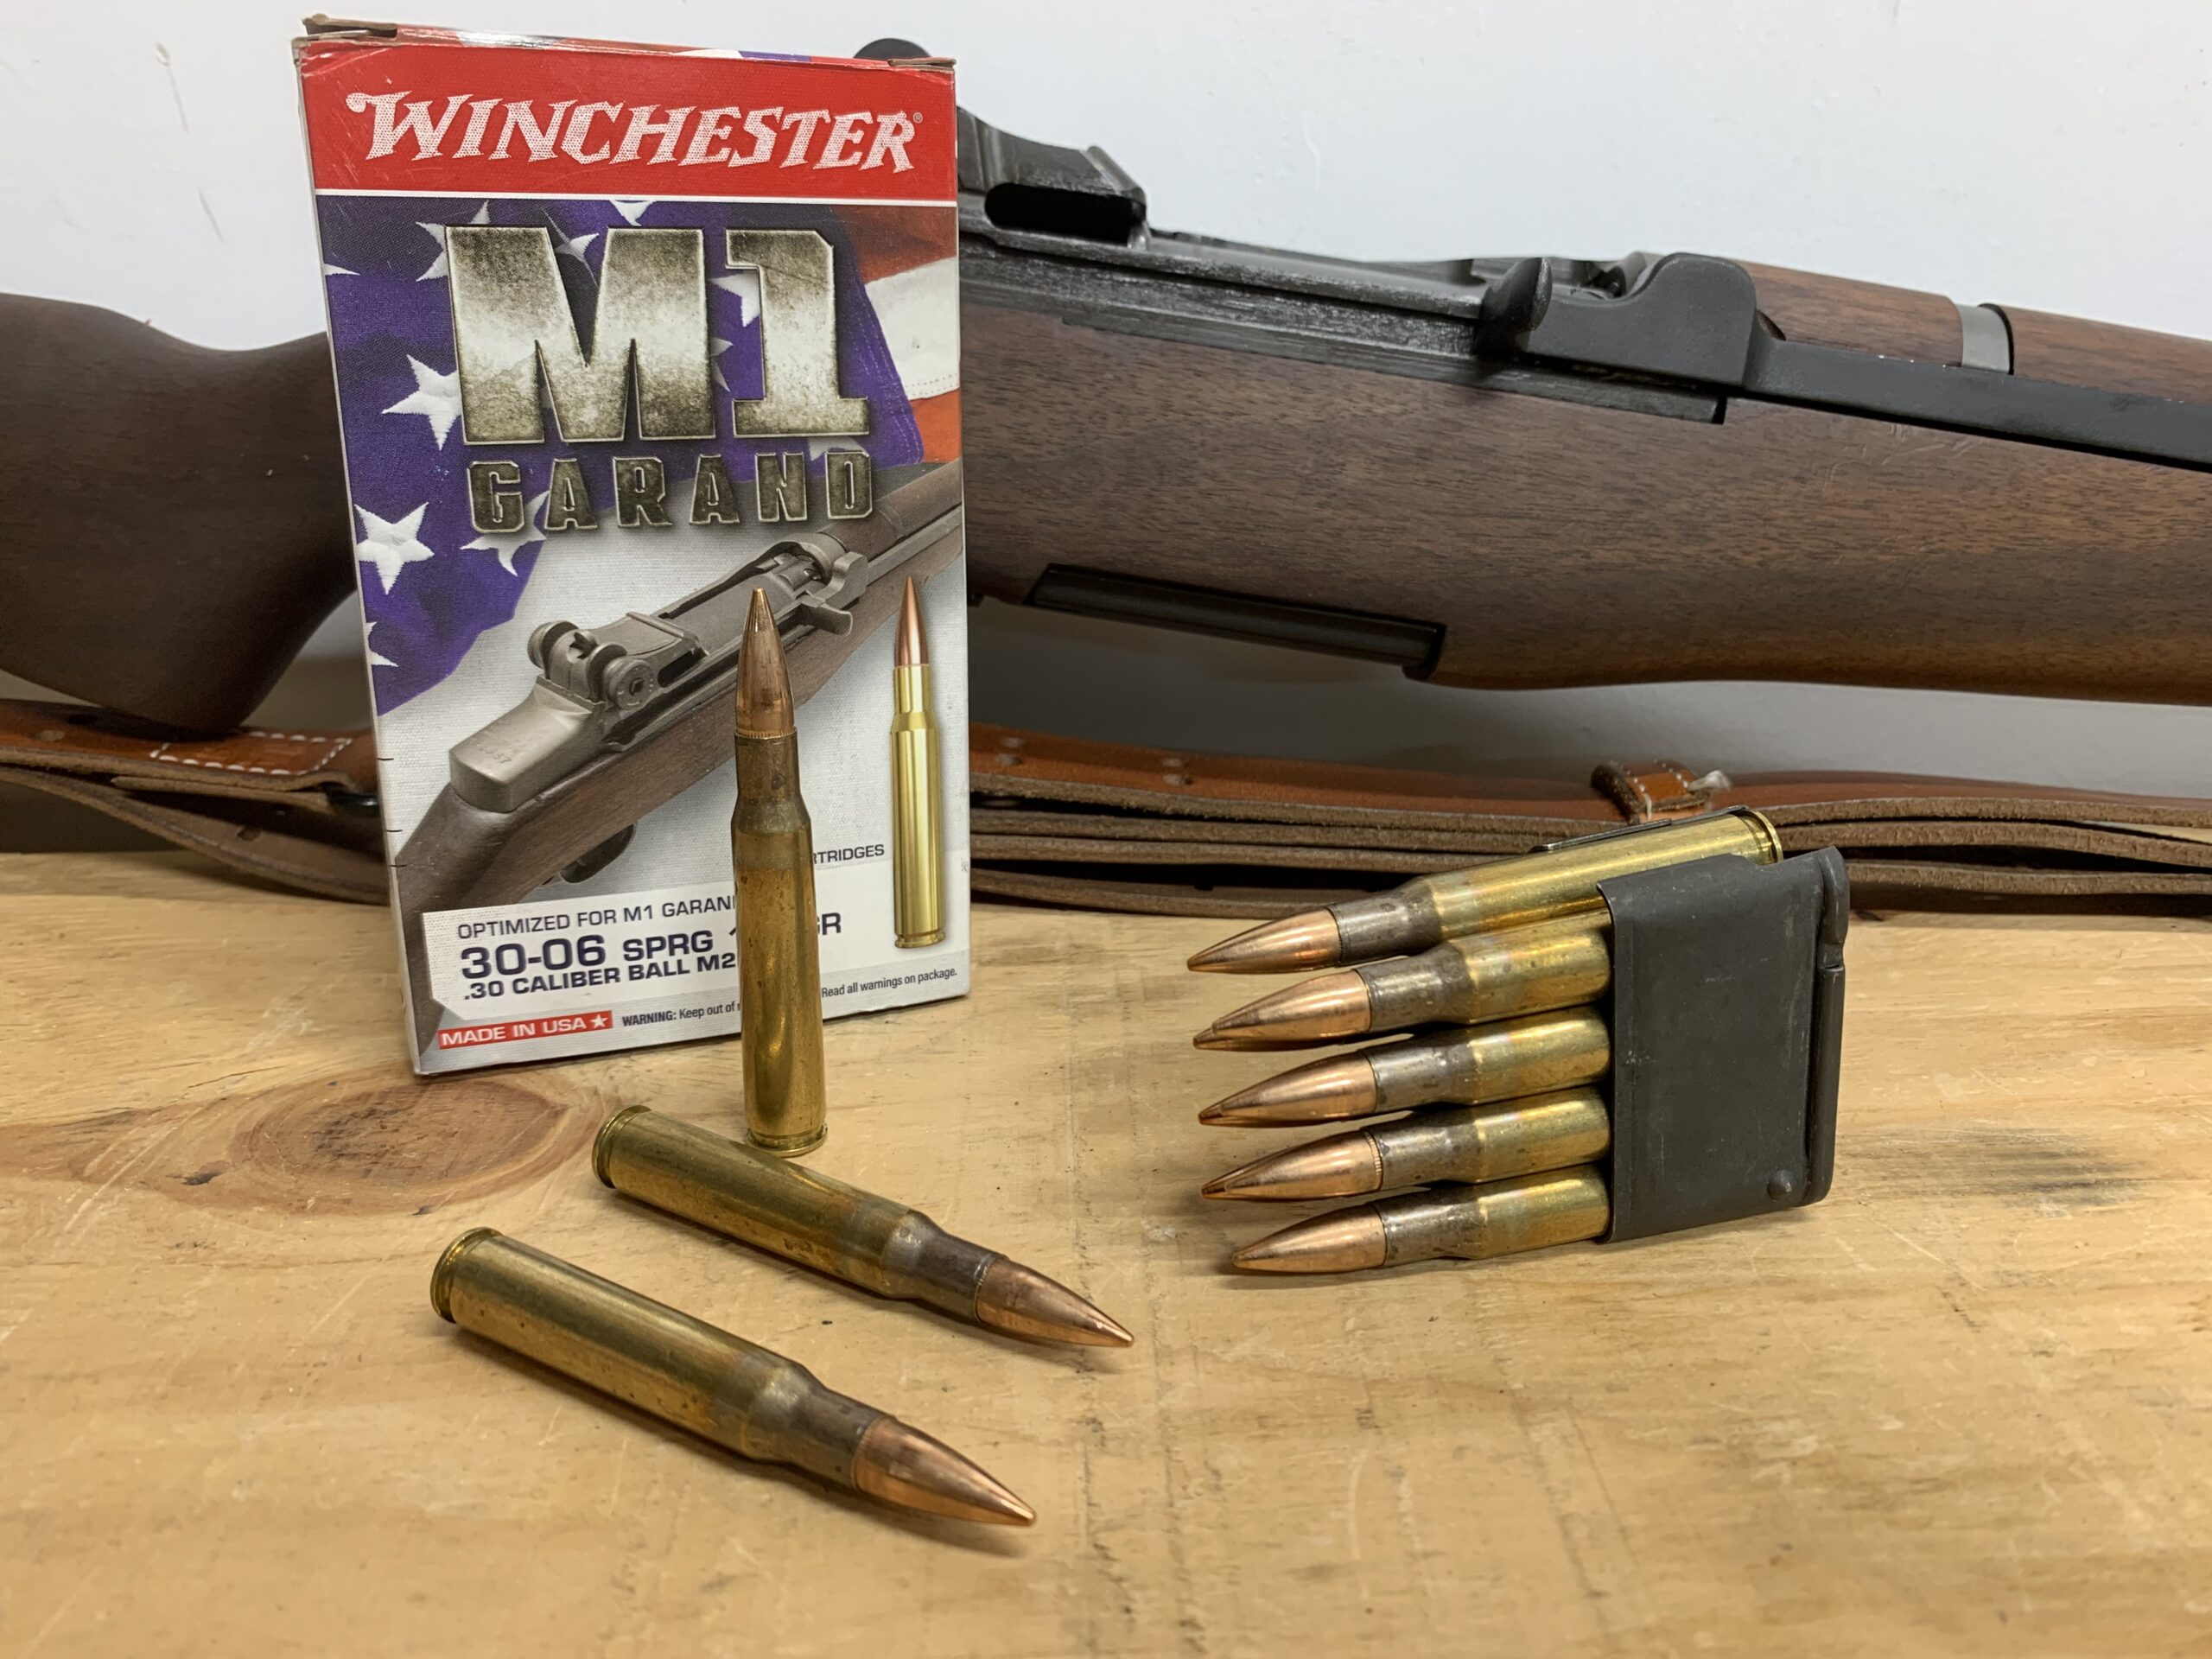 Winchester m2 ball ammo for the M1 Garand